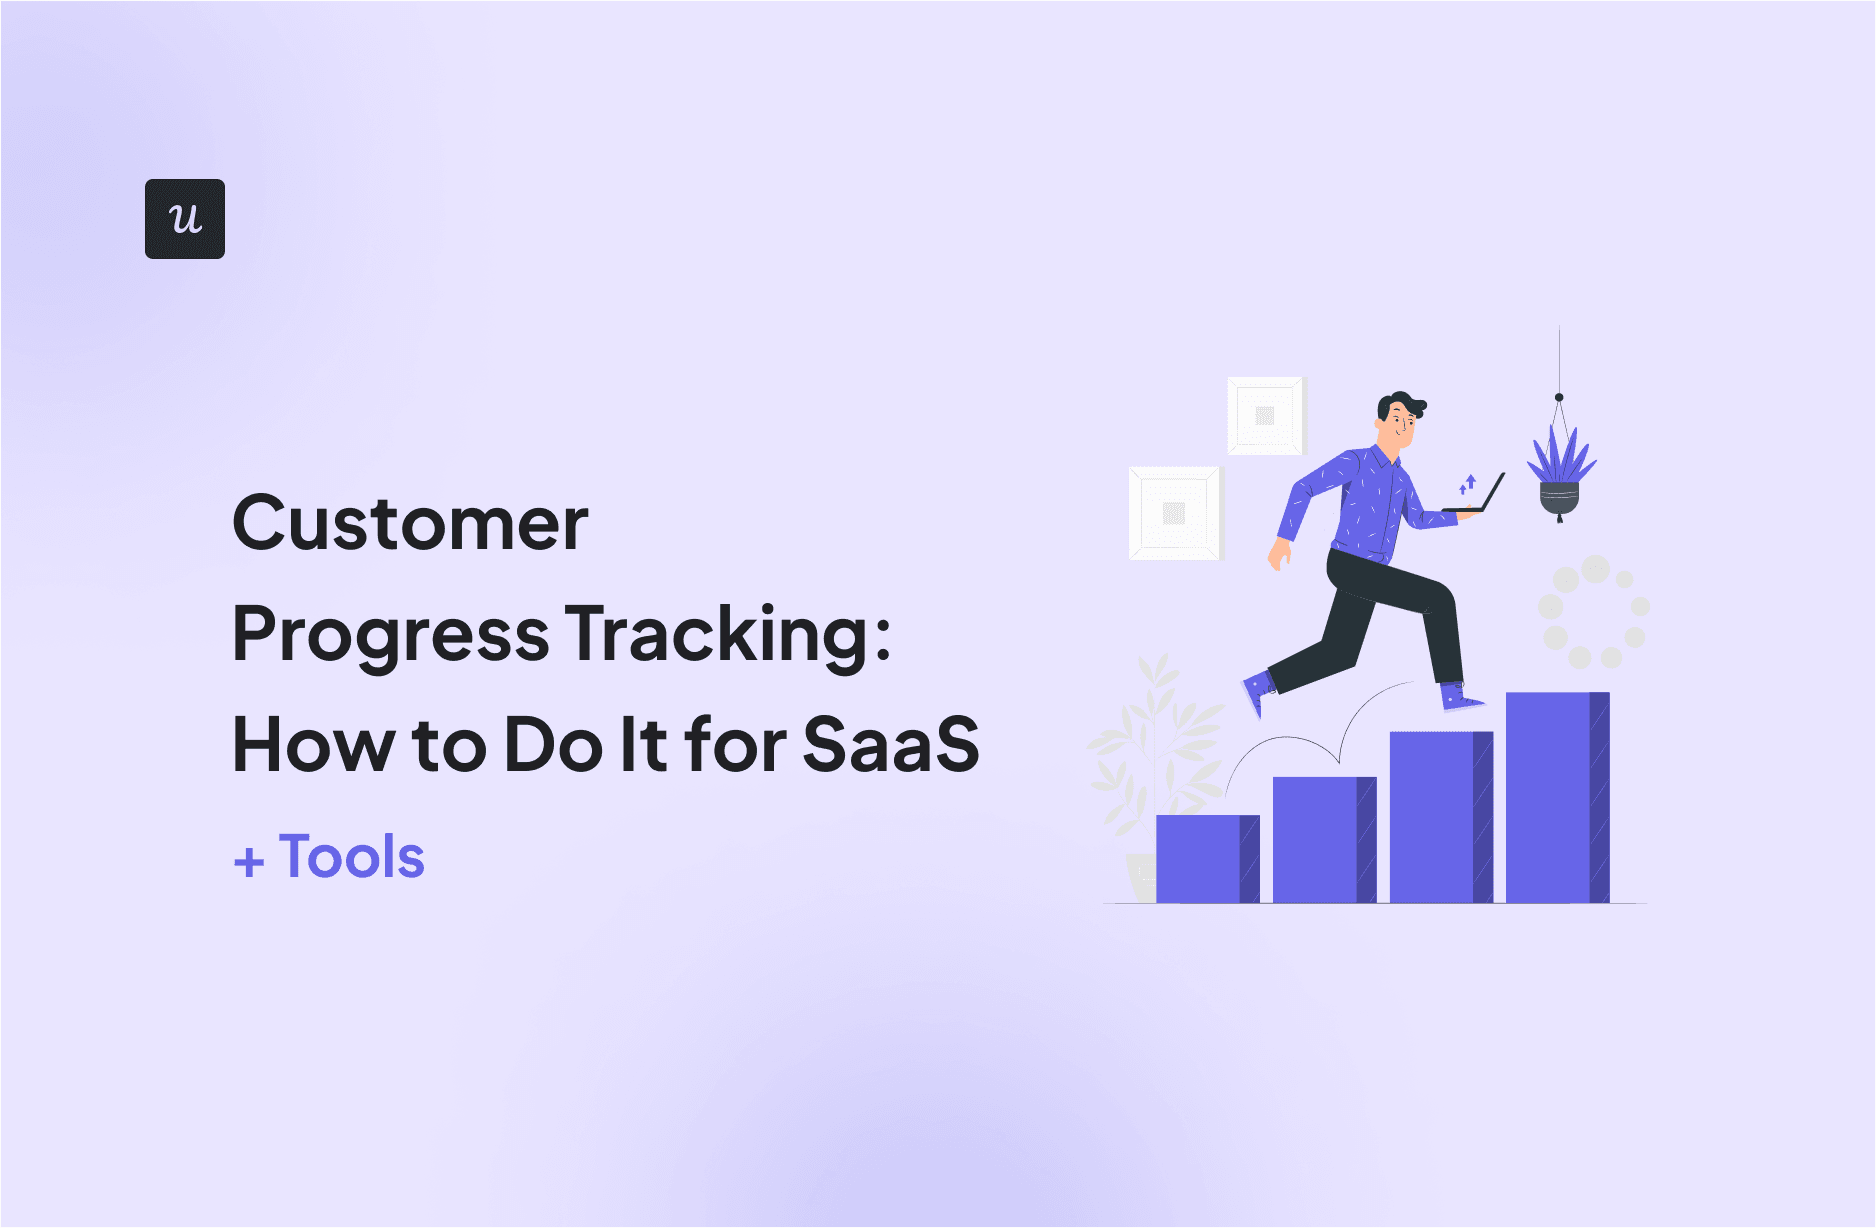 Customer Progress Tracking: How to Do It for SaaS [+ Tools] cover